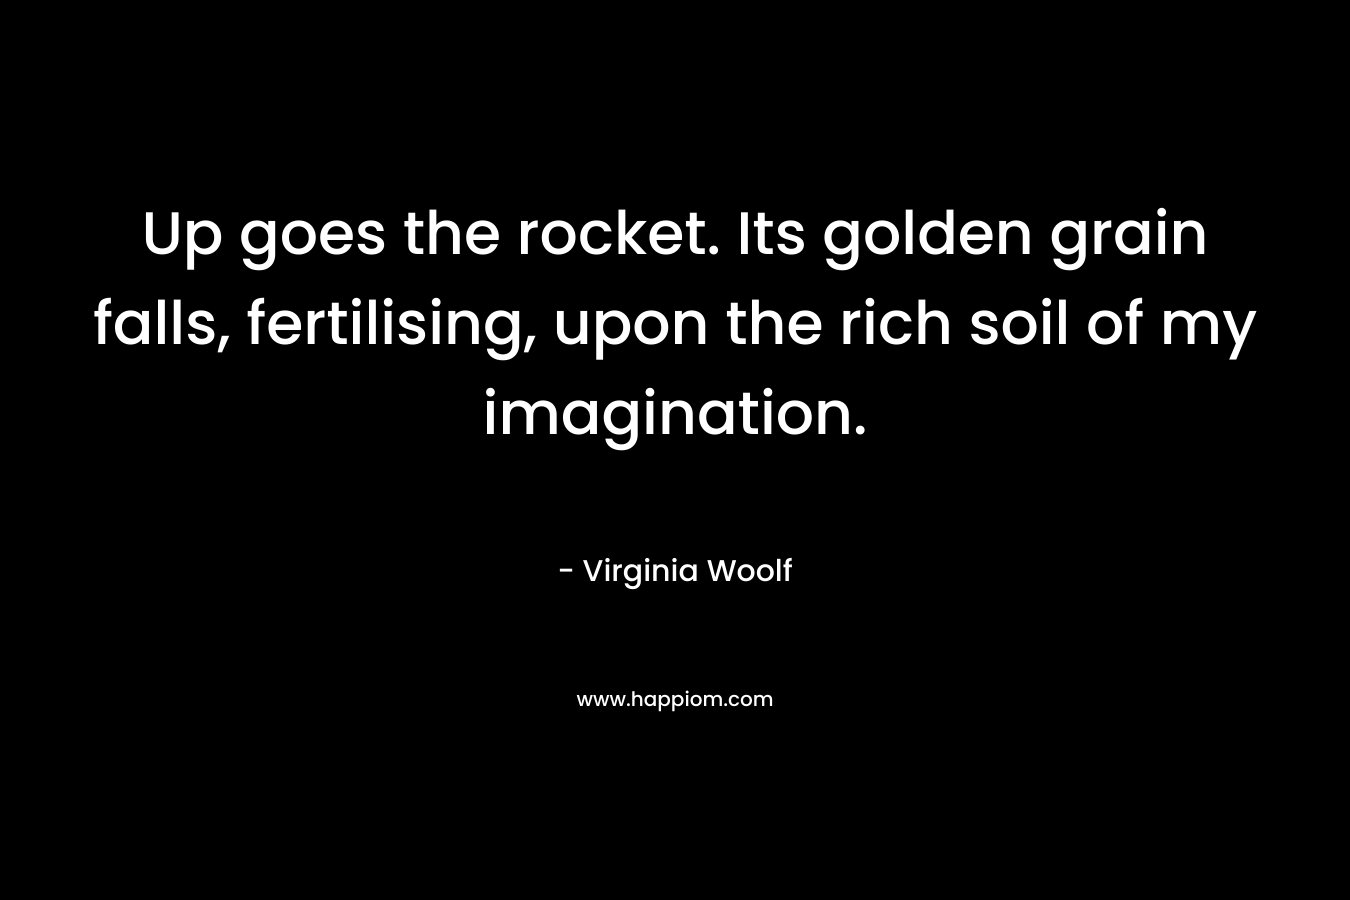 Up goes the rocket. Its golden grain falls, fertilising, upon the rich soil of my imagination.